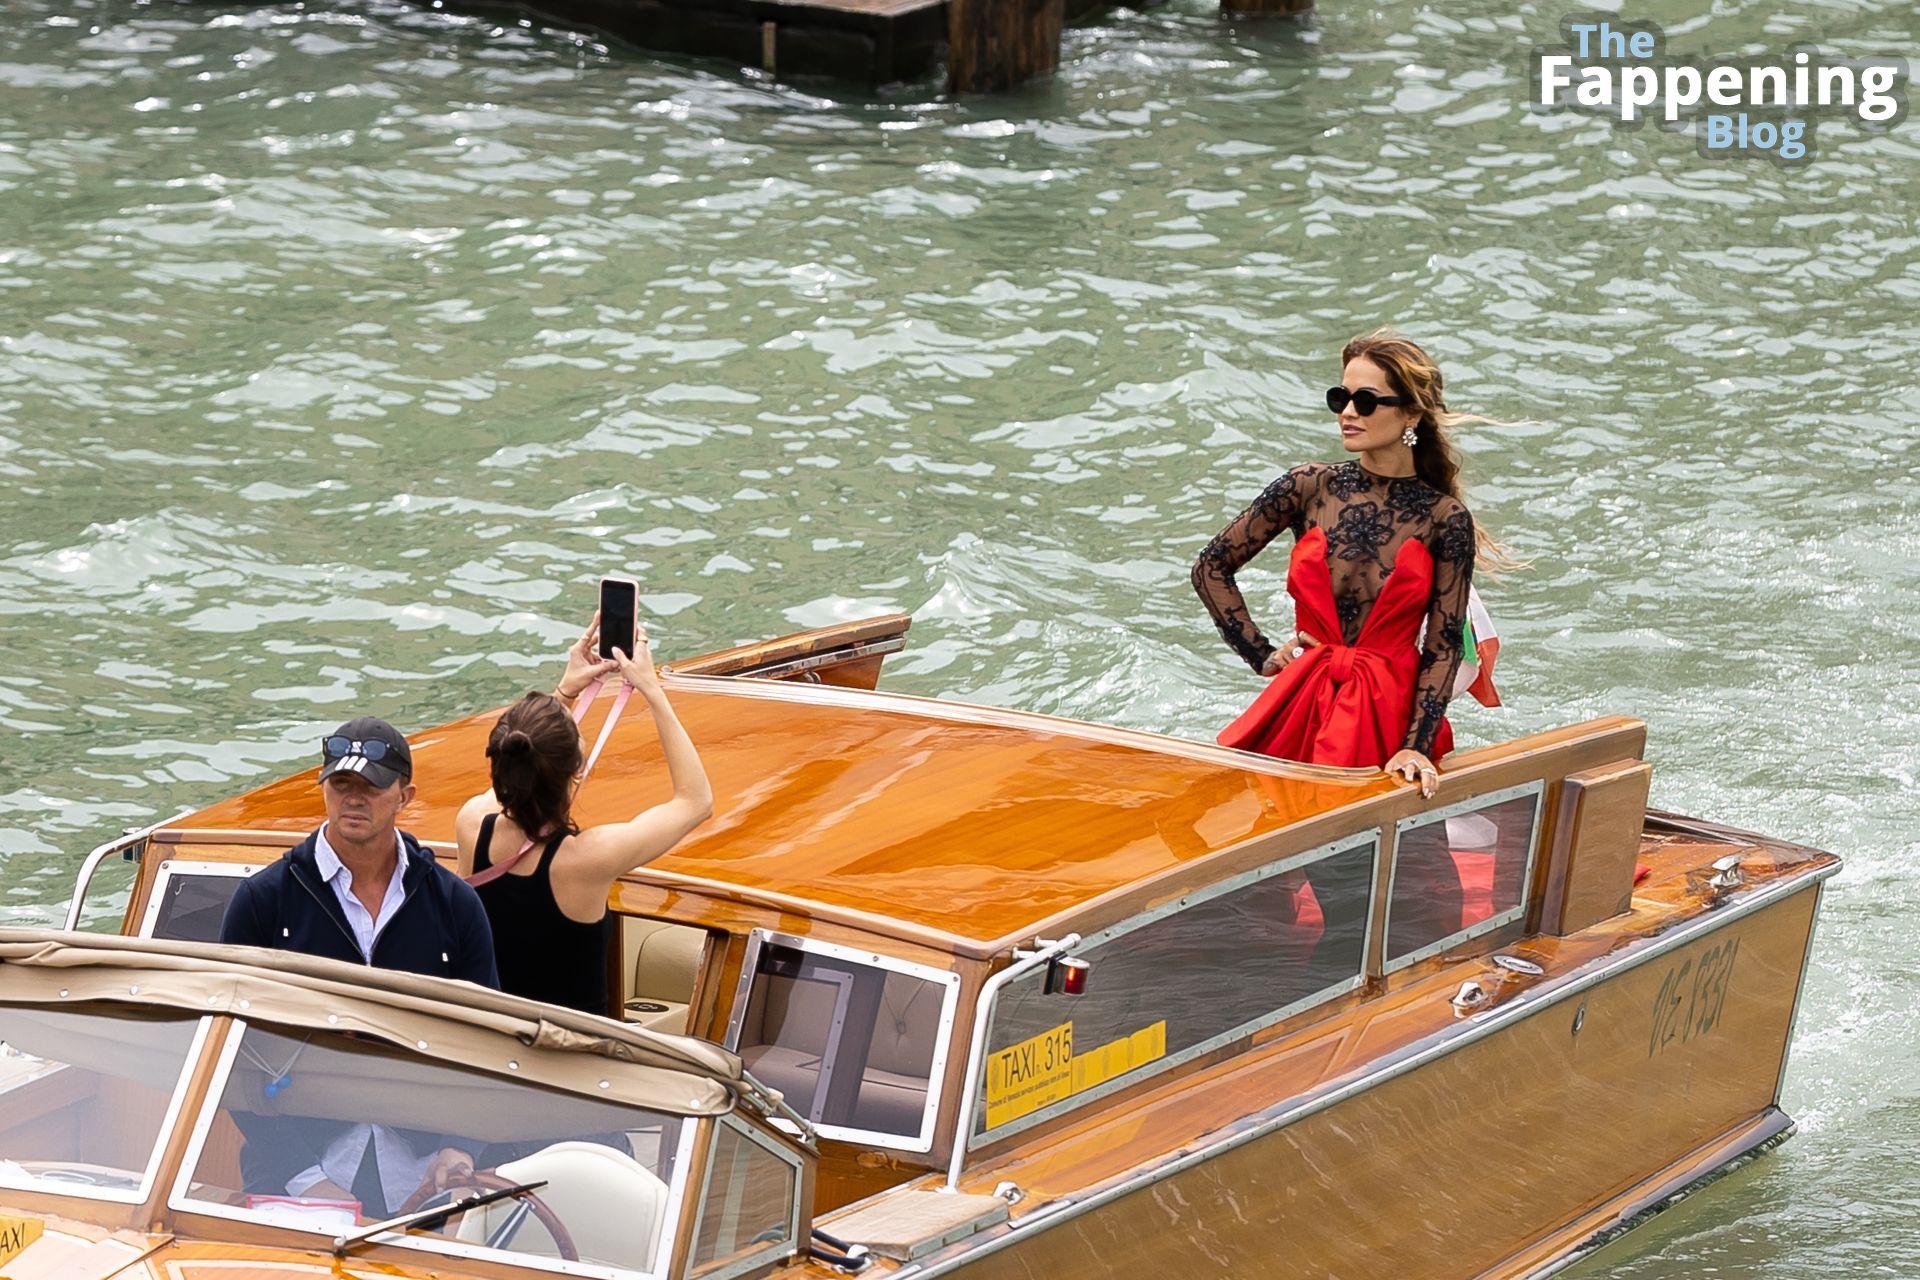 Rita Ora Flaunts Her Boobs and a Long Moschino Red Dress Heading to a Boat in Venice (42 Photos)